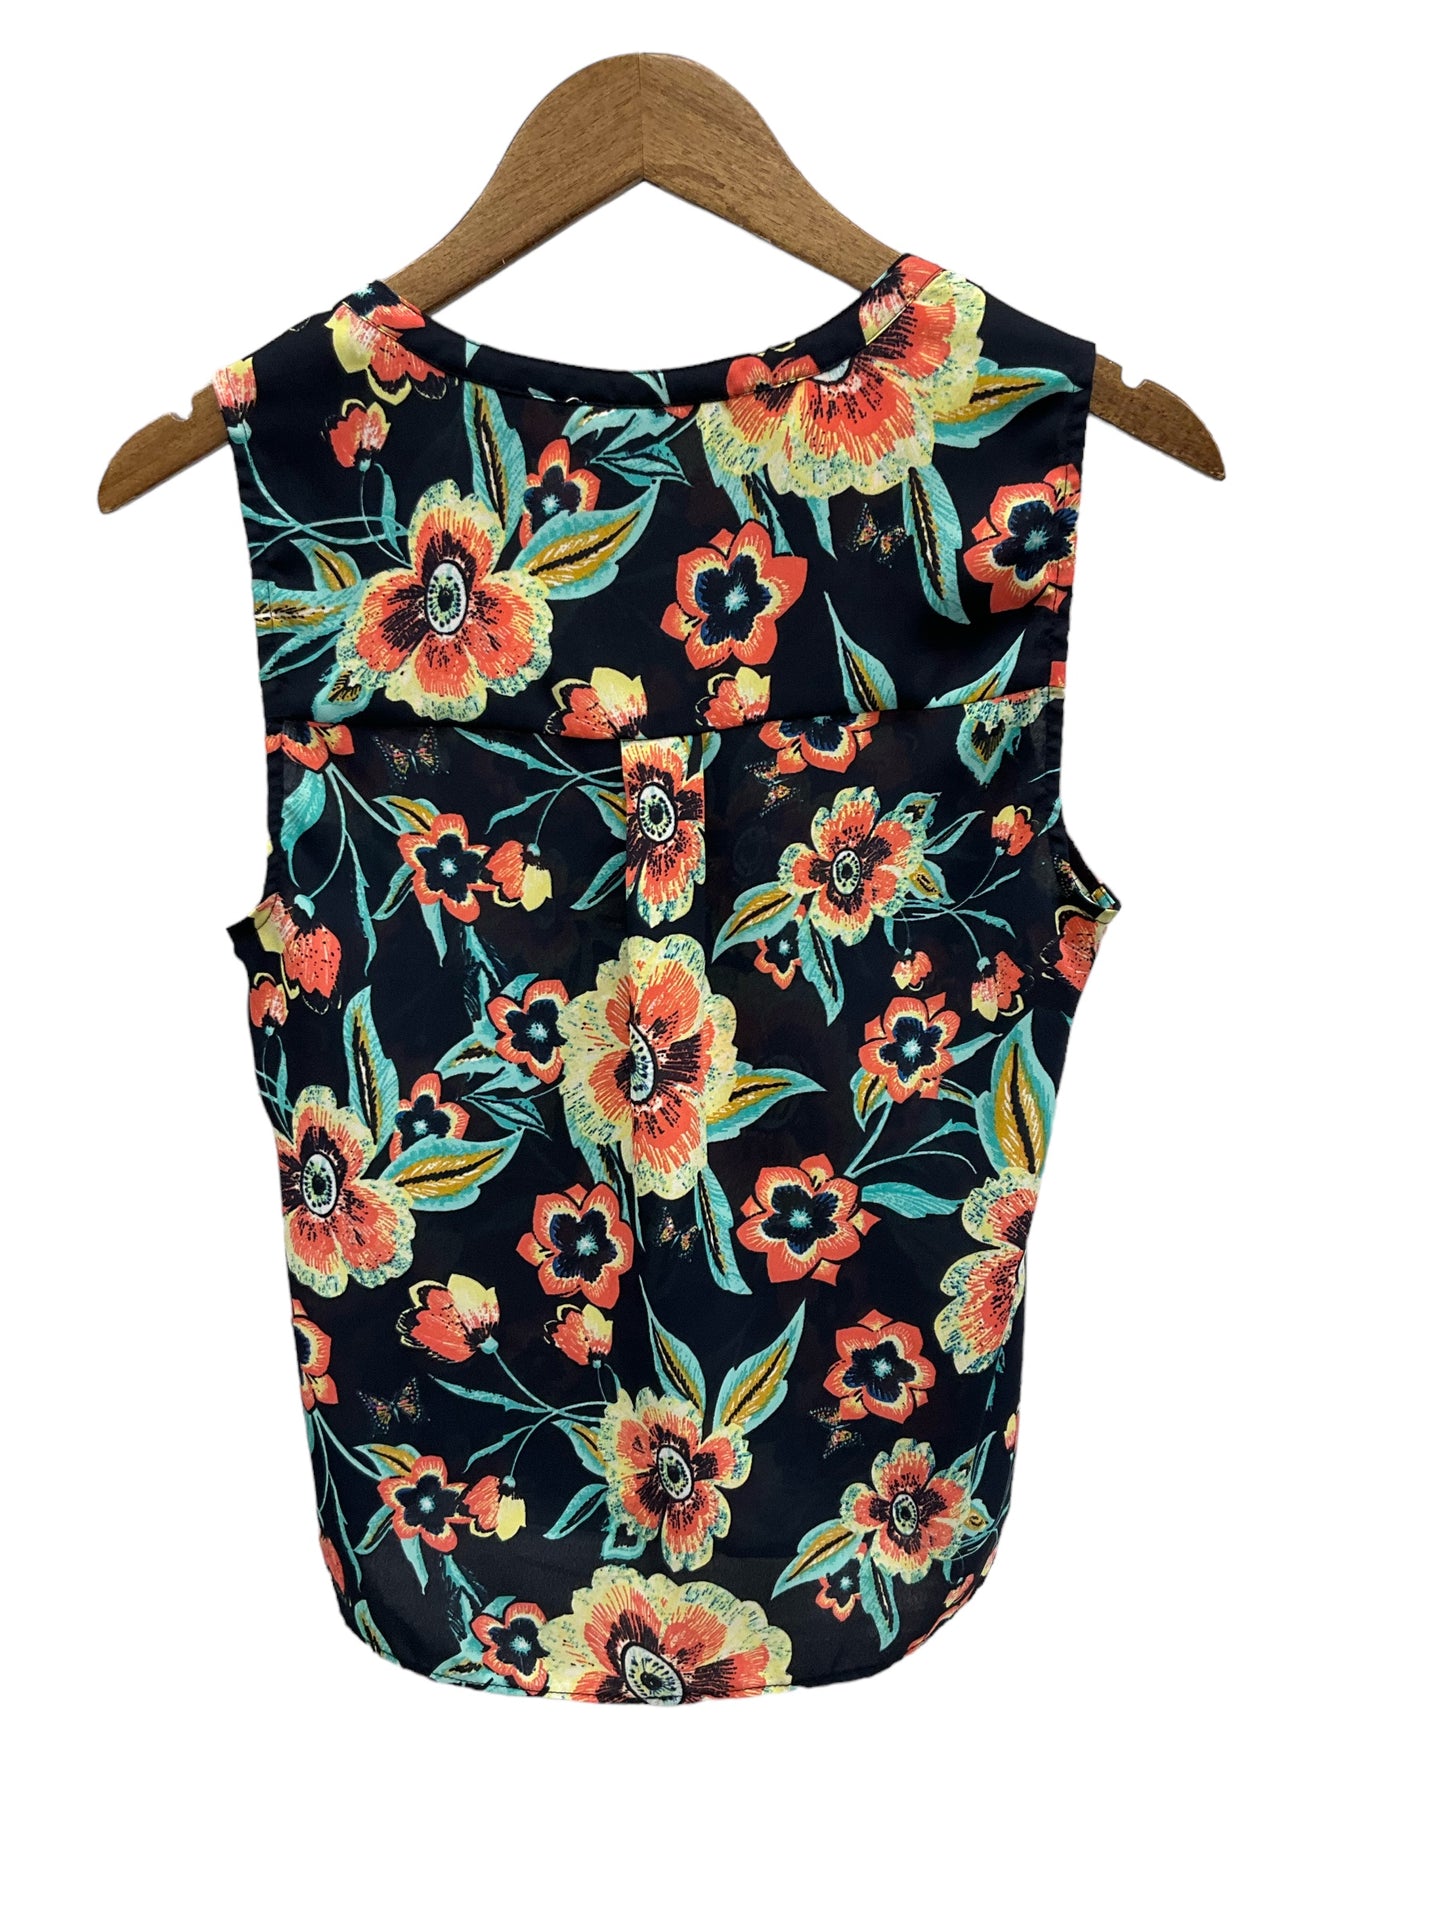 Top Sleeveless By Dr2  Size: S